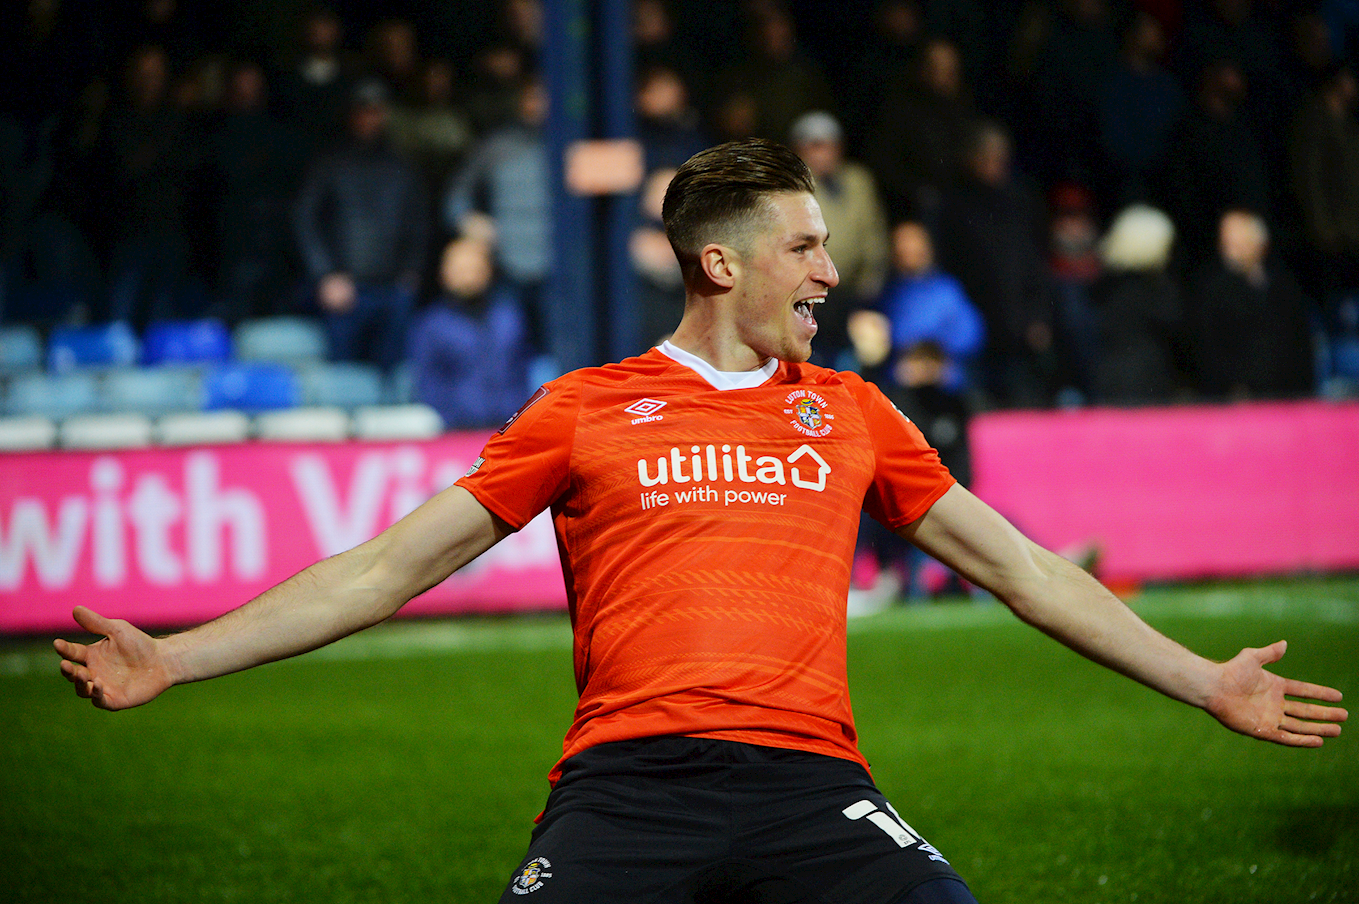 Reece Burke knee-slides after putting Luton Town in the lead against Chelsea.